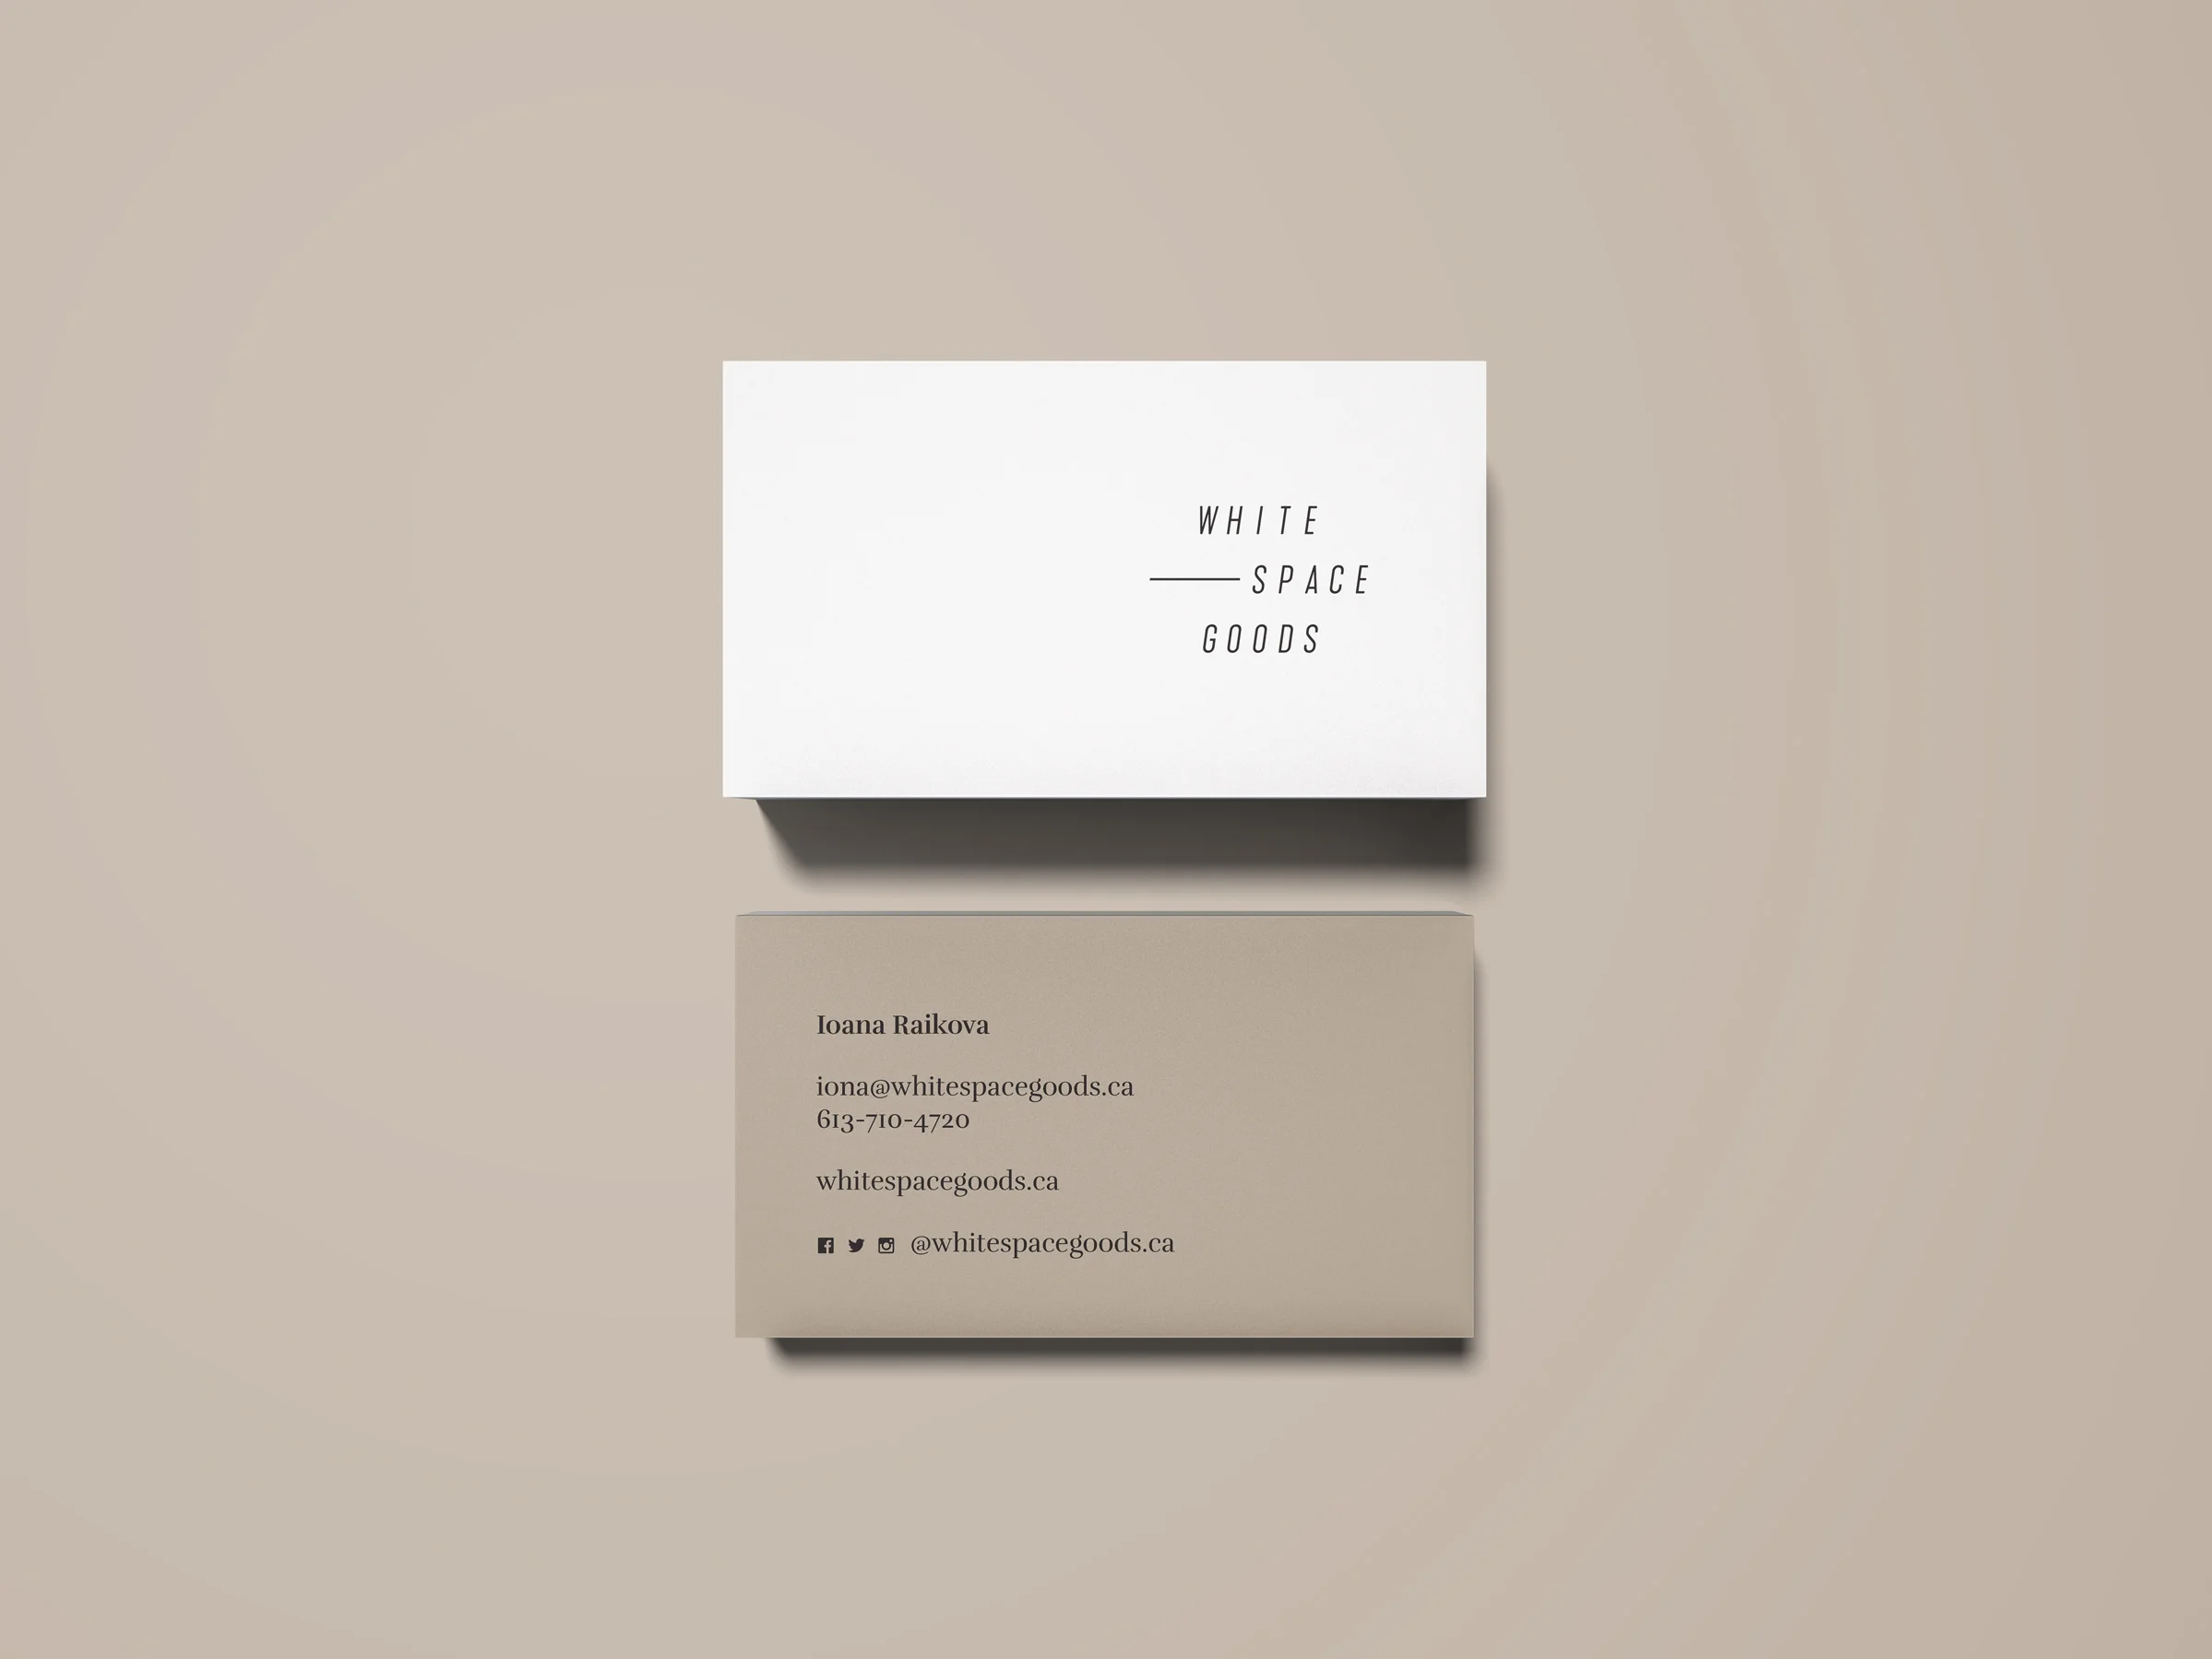 Whitespace Goods business cards for Ottawa-based handmade knitware and decor by graphic designer idApostle